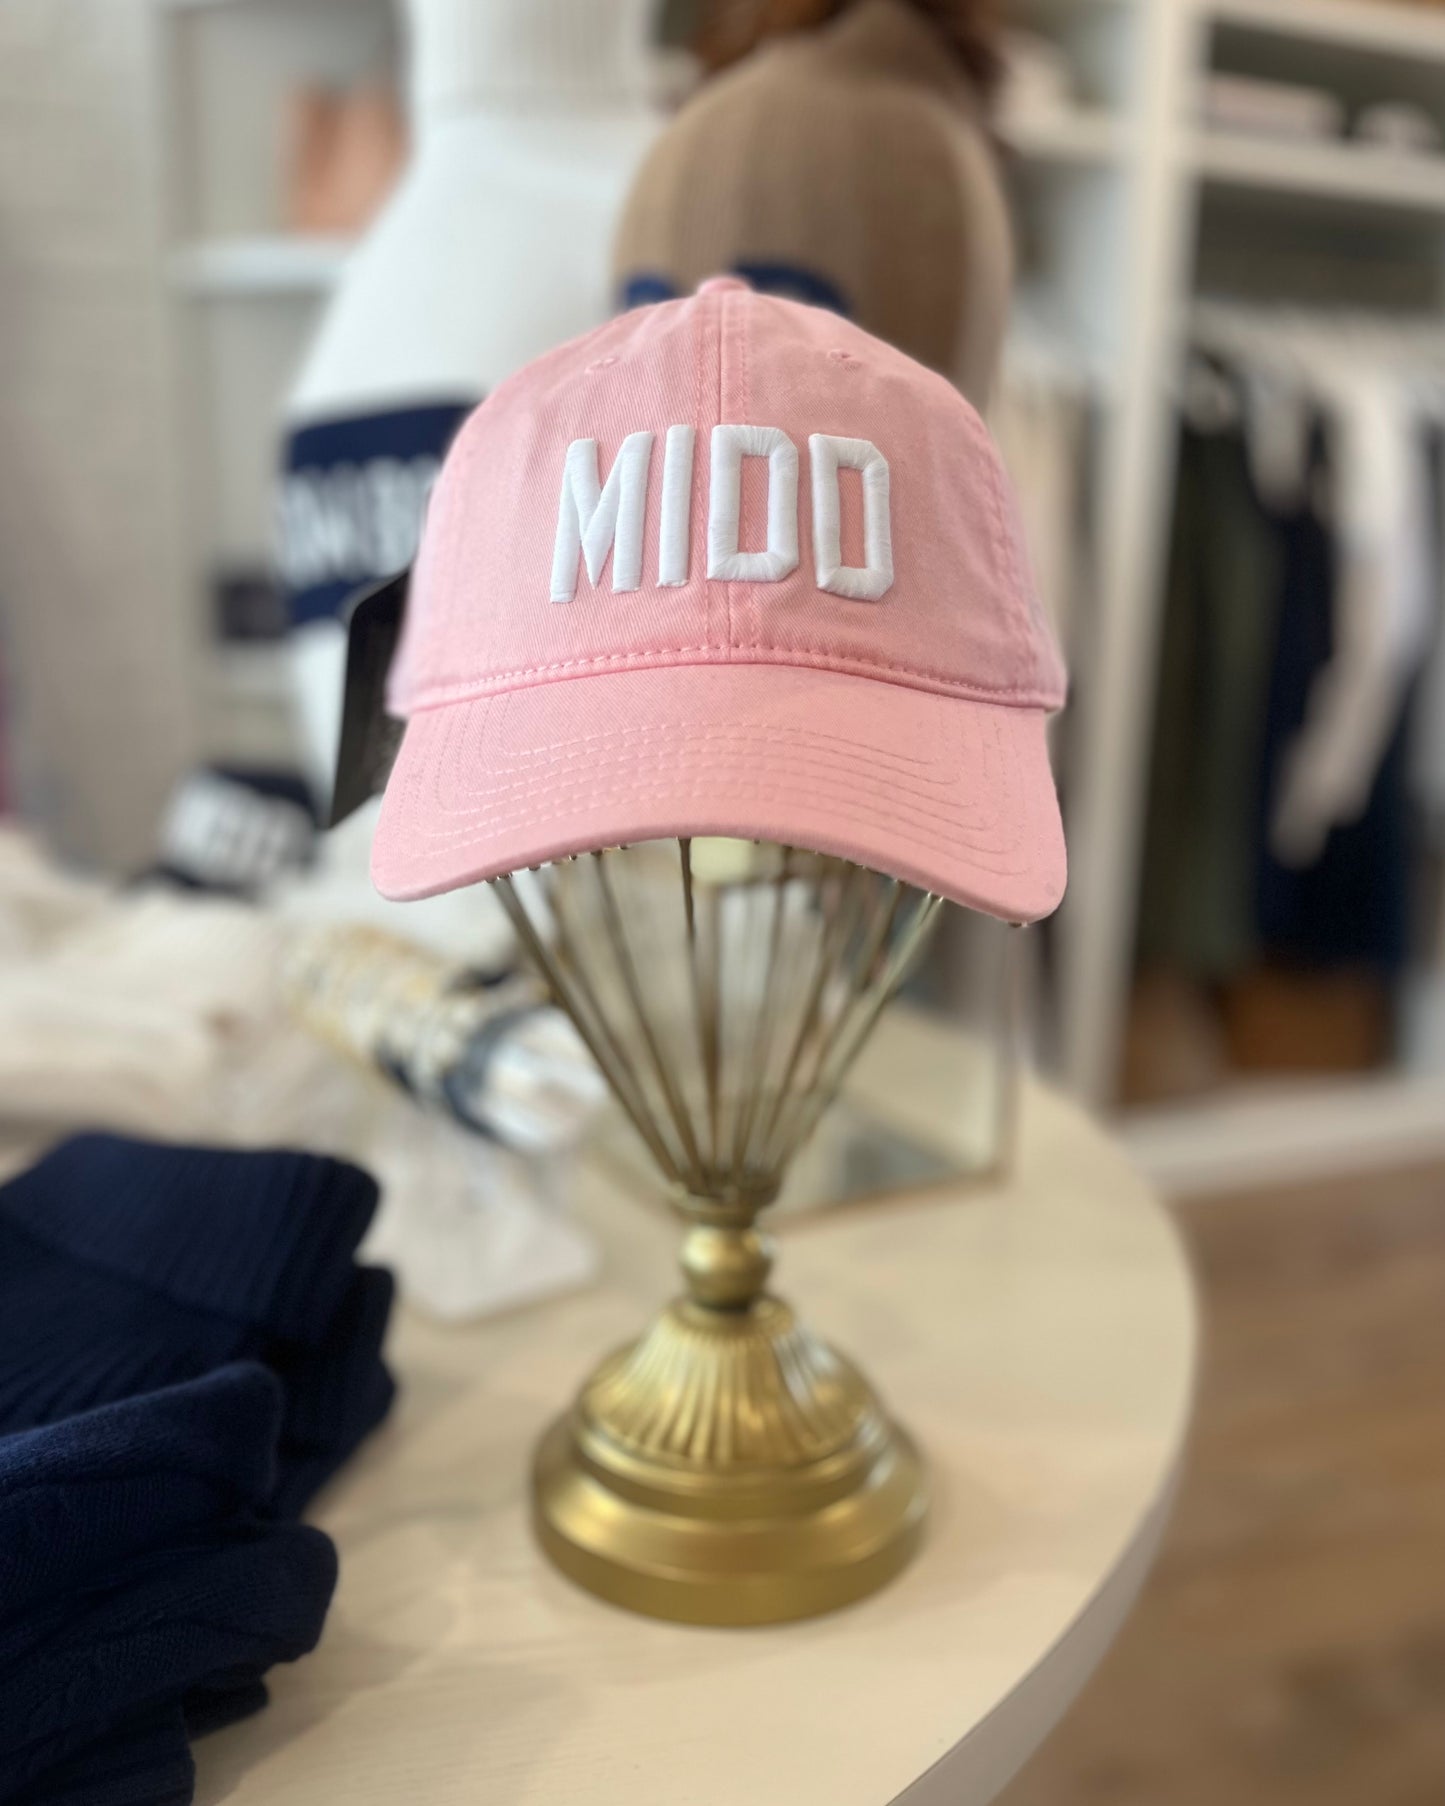 Image of Middlebury College MIDD pink hat with white stitch sitting on a table 